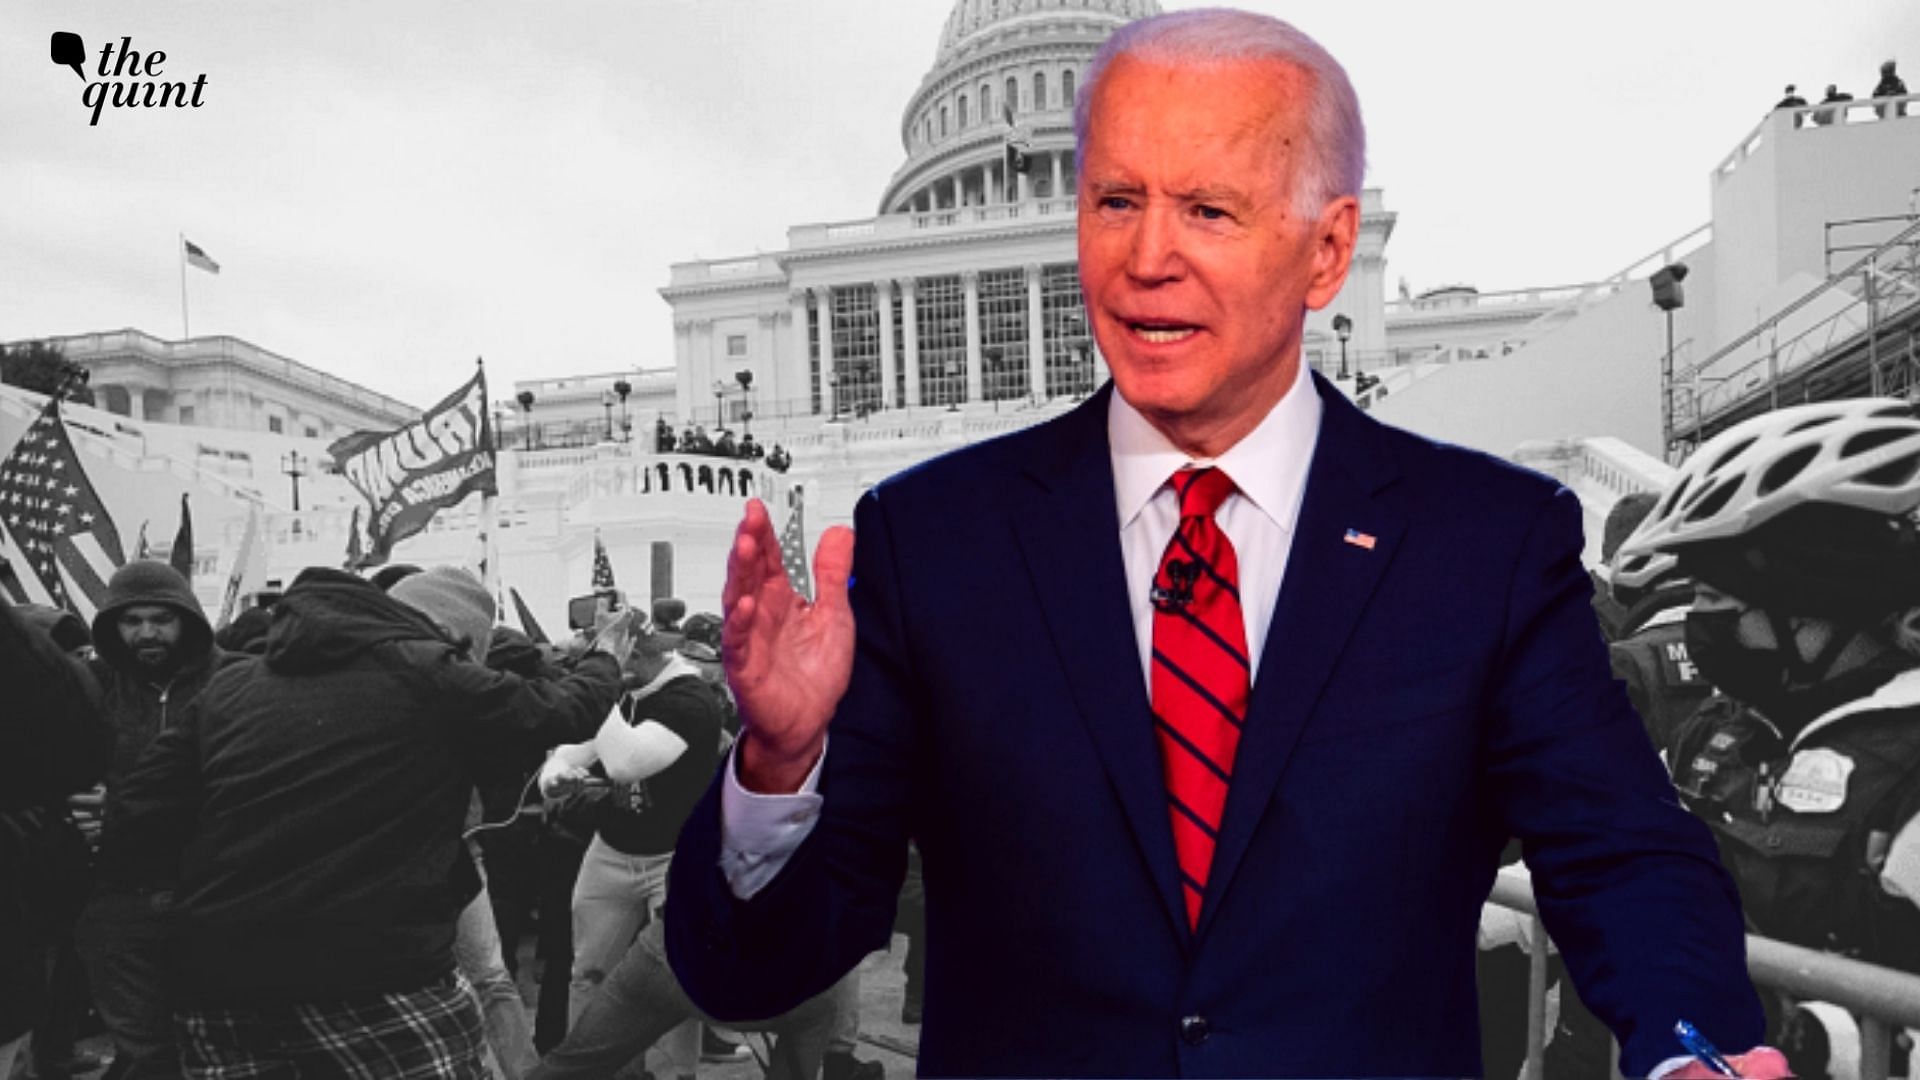 <div class="paragraphs"><p>Without taking names, US President Joe Biden went on to lambast a “former President of the United States” – an evident reference to previous US President Donald Trump who was still in power at the time of the capitol attack.</p></div>